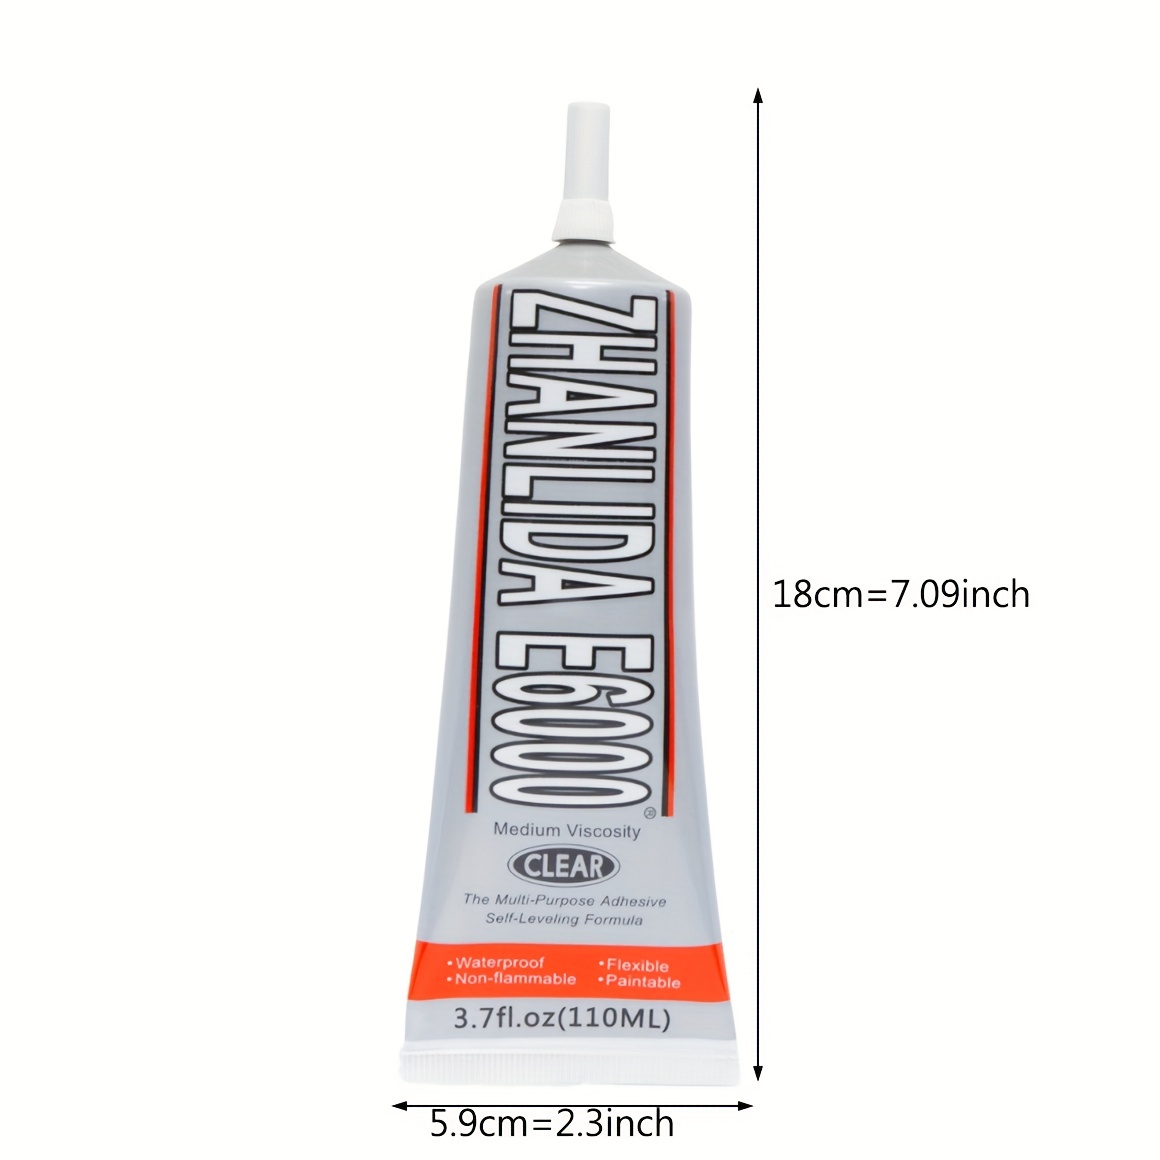 QL Crystal E6000 Superglue For Mobile Phone Touch Screen Repair And DIY  Boho Jewelry From Liulaolao, $52.81